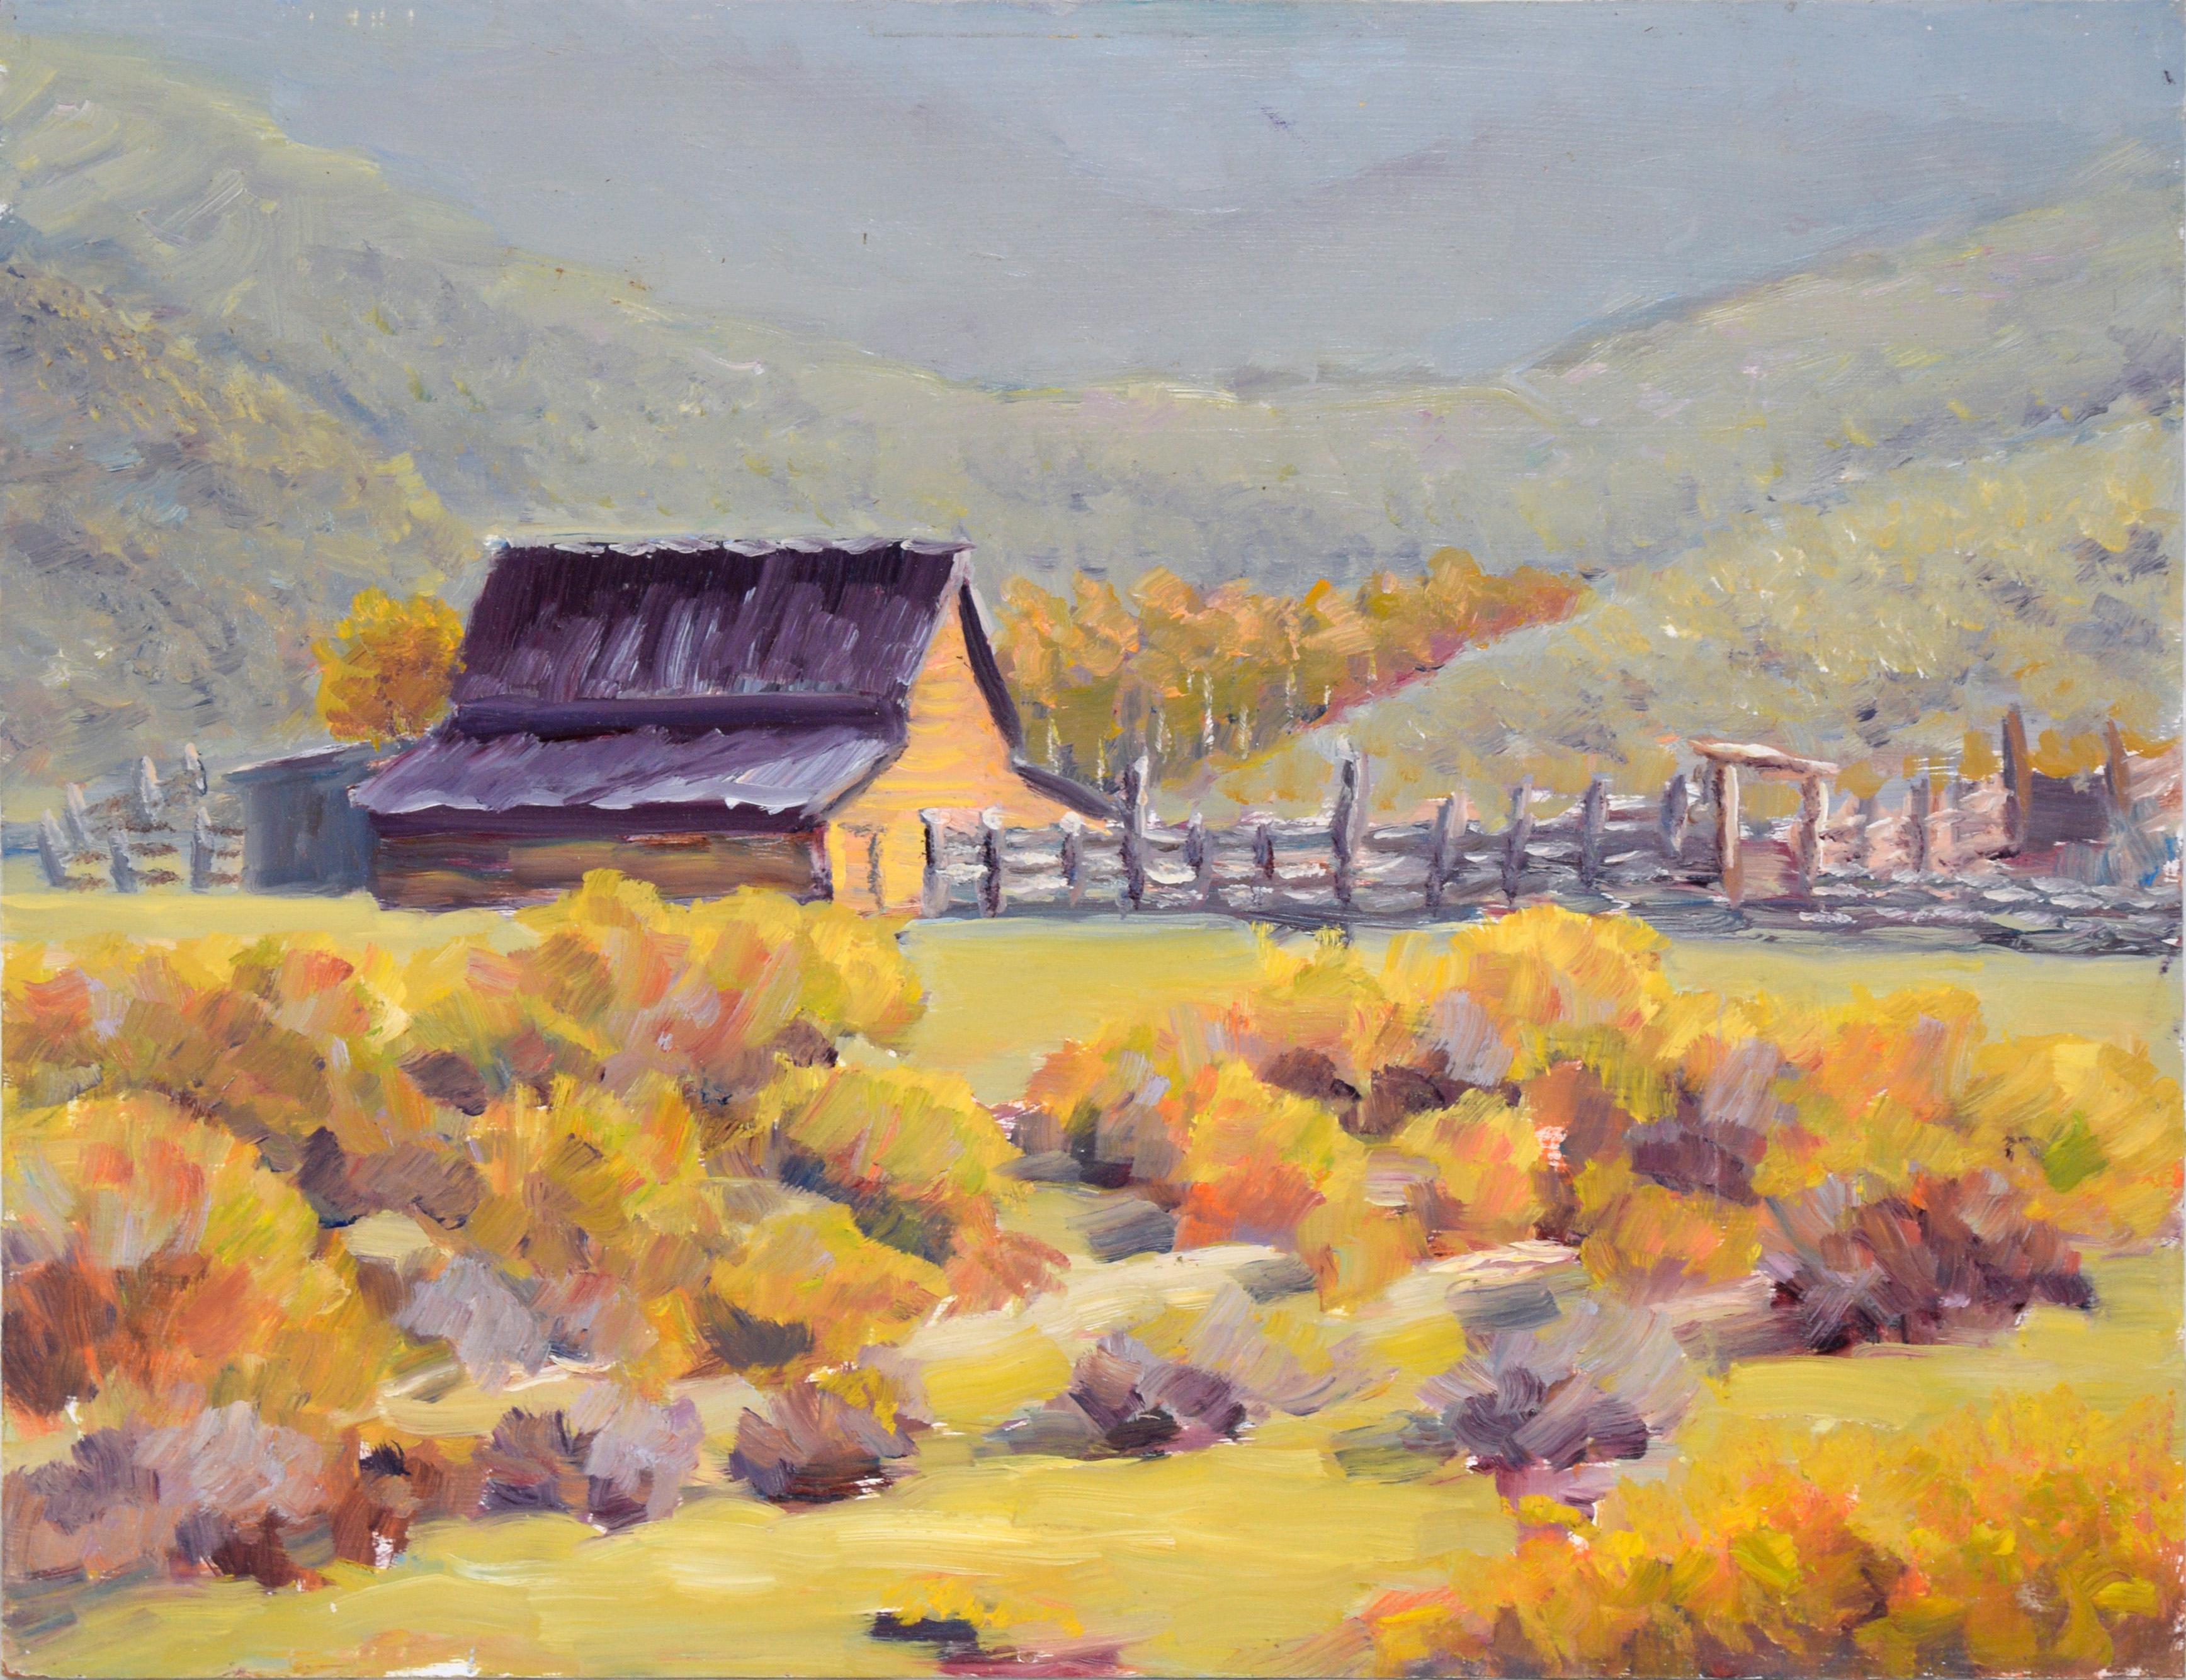 Nick White Landscape Painting - Wyoming Barn - Plein Aire Landscape in Oil on Masonite